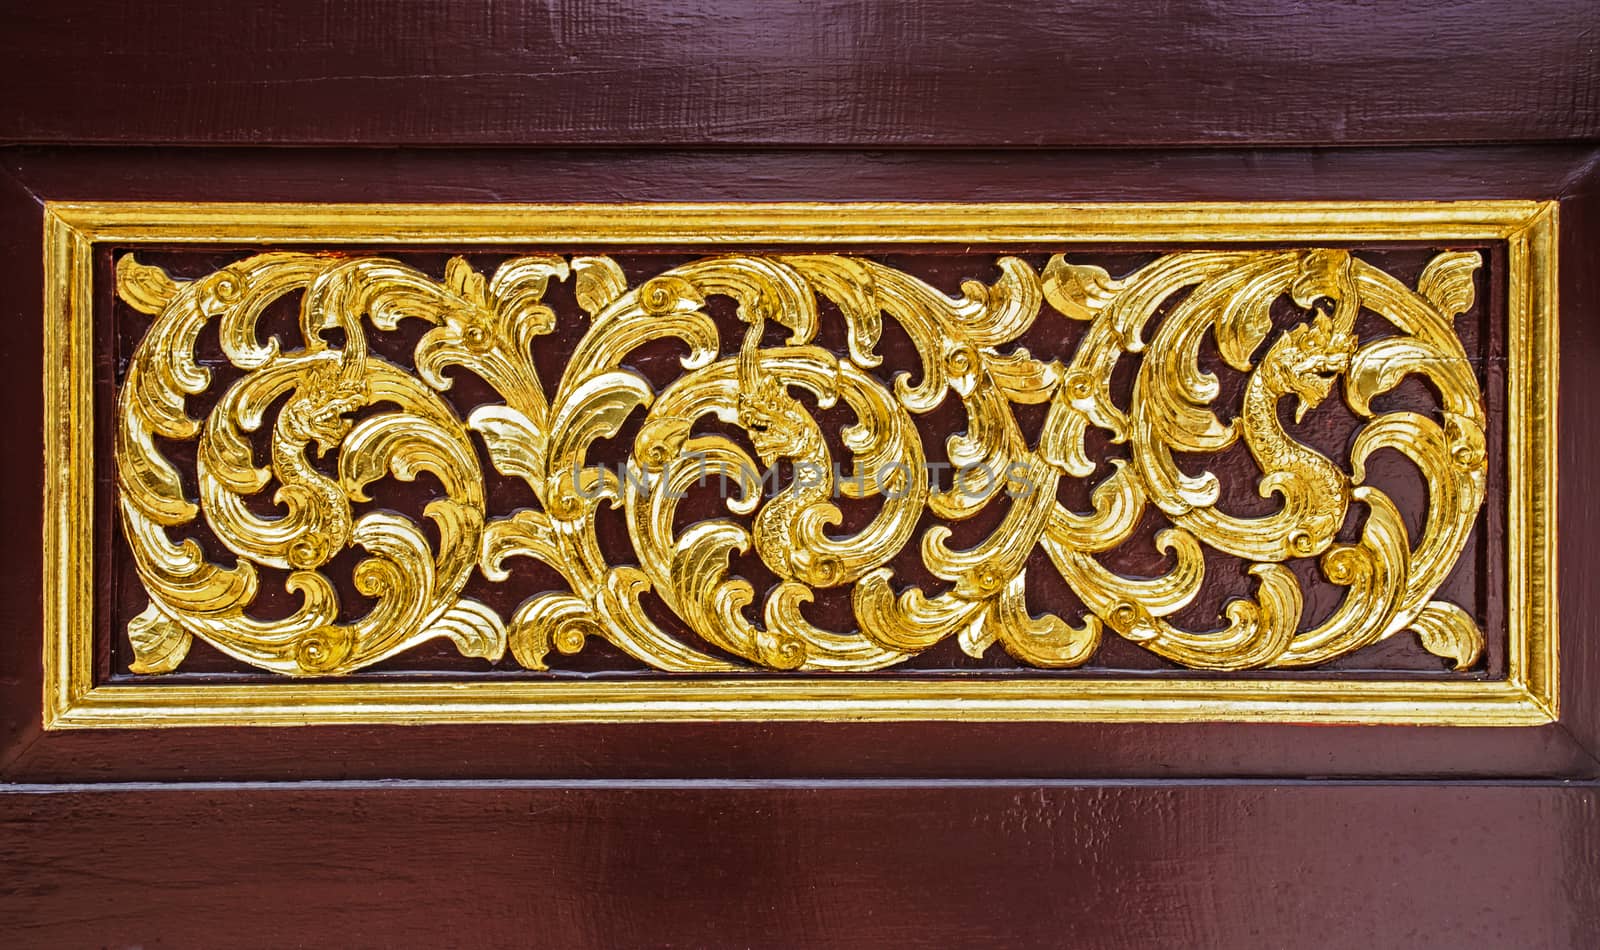 Wood carving decorated at a temple in Chiang Mai,Thailand